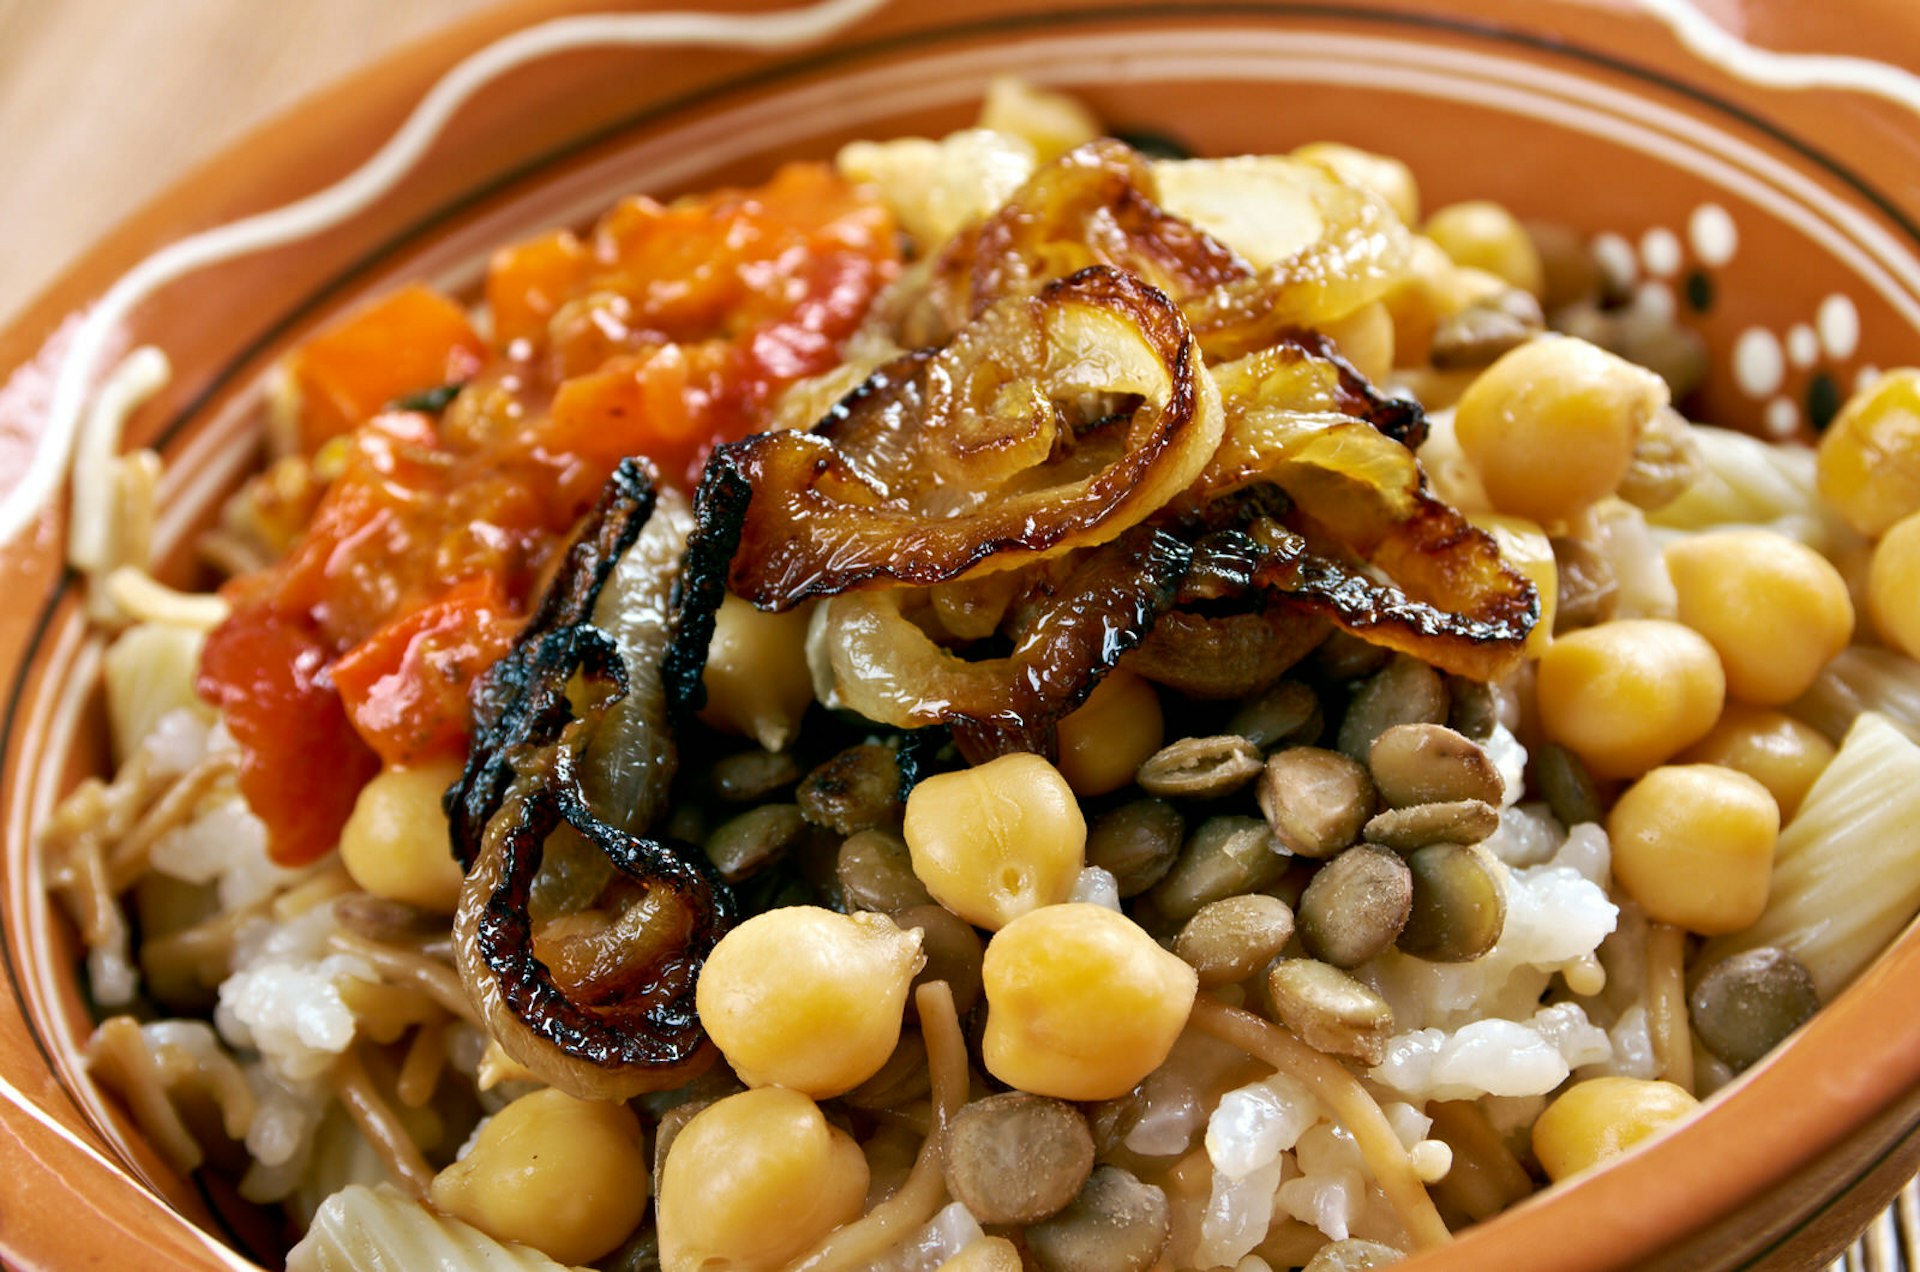 Kushari, an Egyptian dish of rice, macaroni and lentils mixed together, topped with a tomato-vinegar sauce; some add short pieces of spaghetti garnished with chickpeas and crispy fried onions